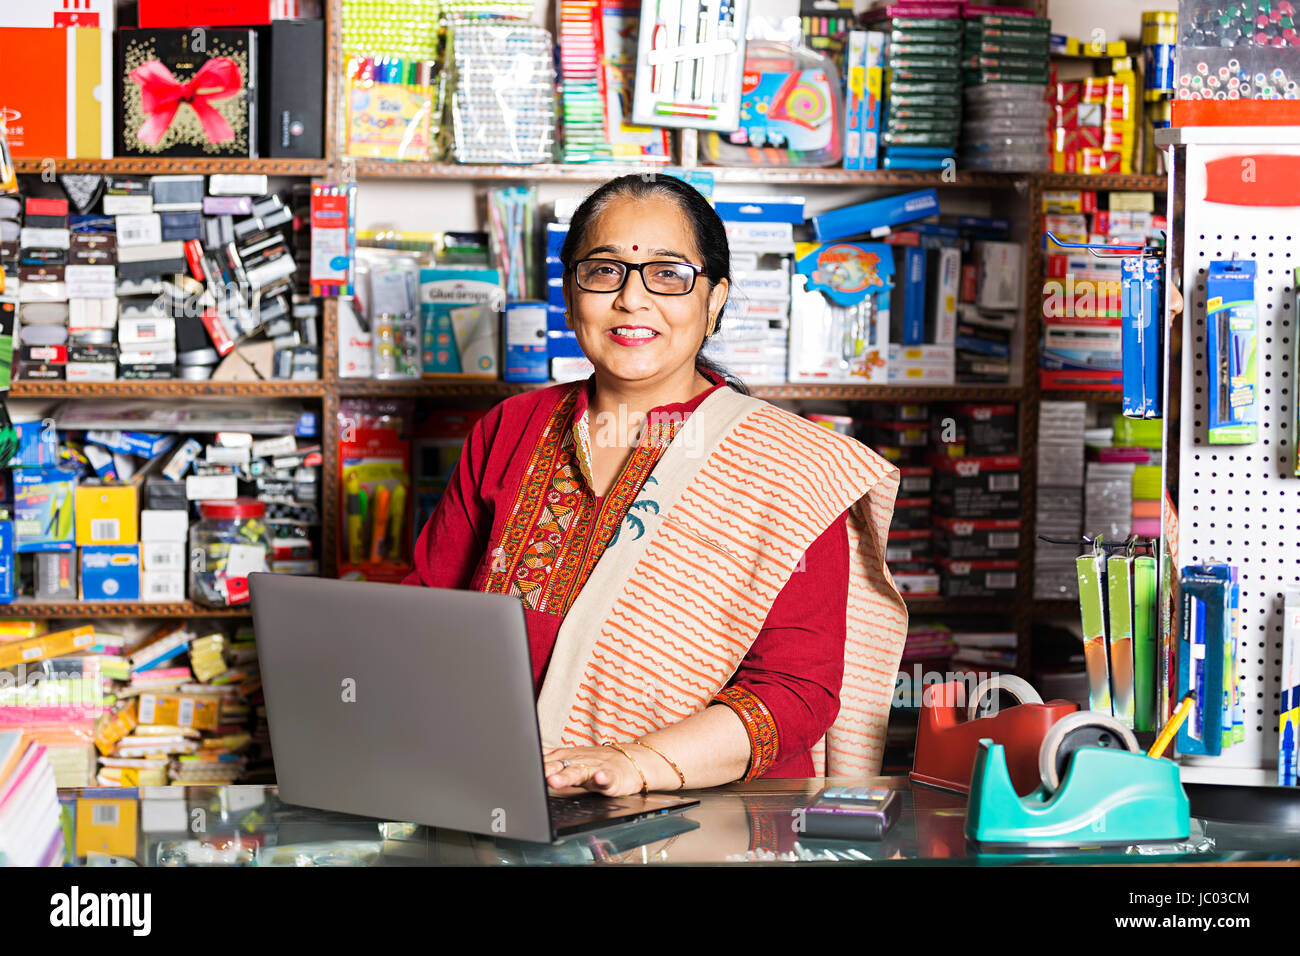 1 Indian shop keeper woman using laptop in stationary shop Banque D'Images